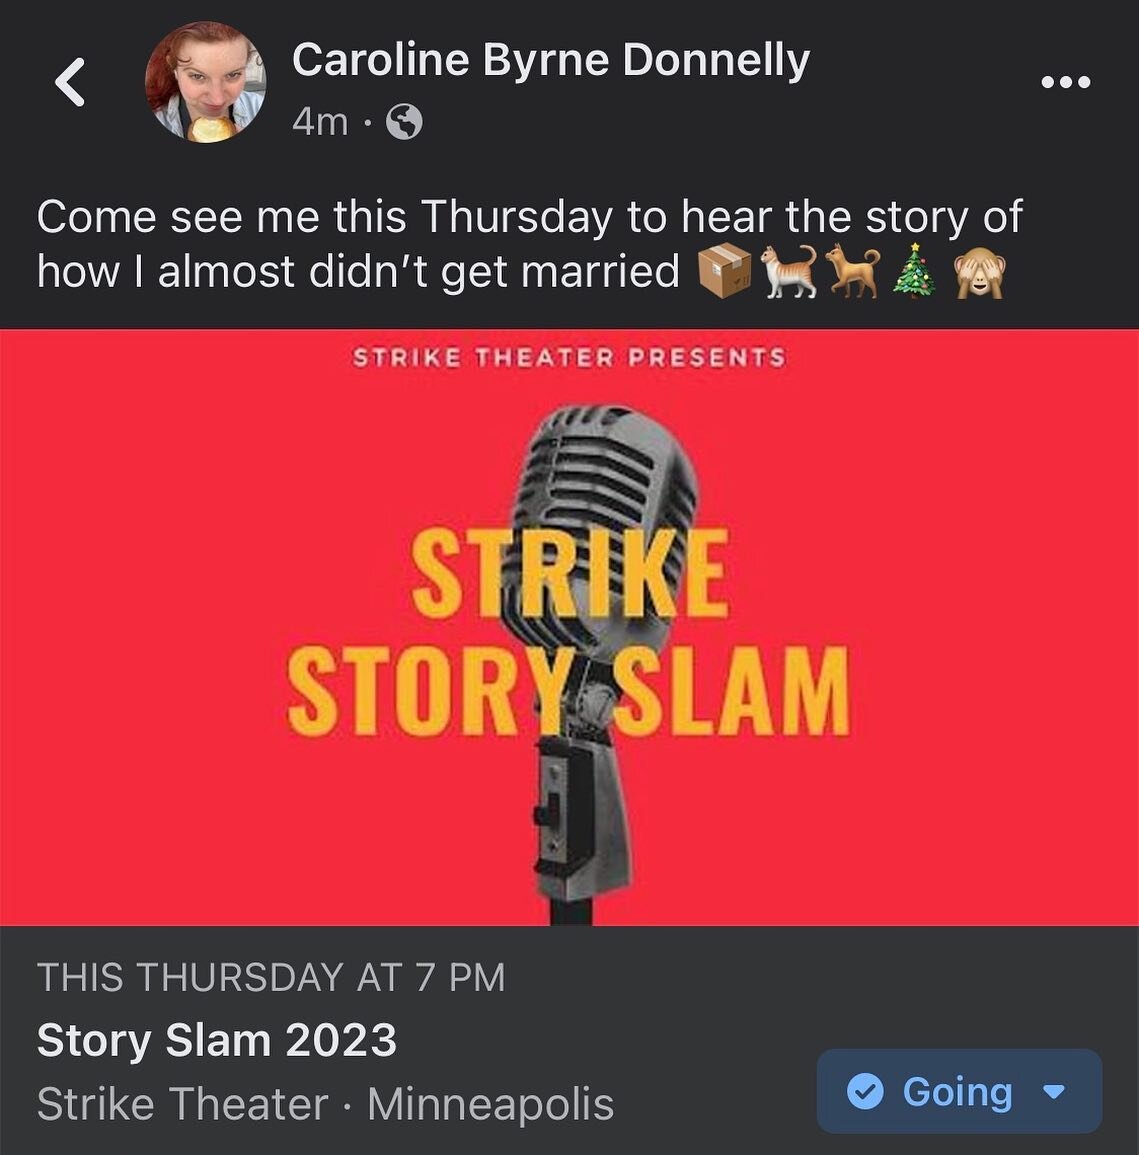 @strike_theater on Thursday, I&rsquo;ll be telling the story of a dirty trick that almost ended my relationship. It&rsquo;ll be fun! #storytelling #truestory